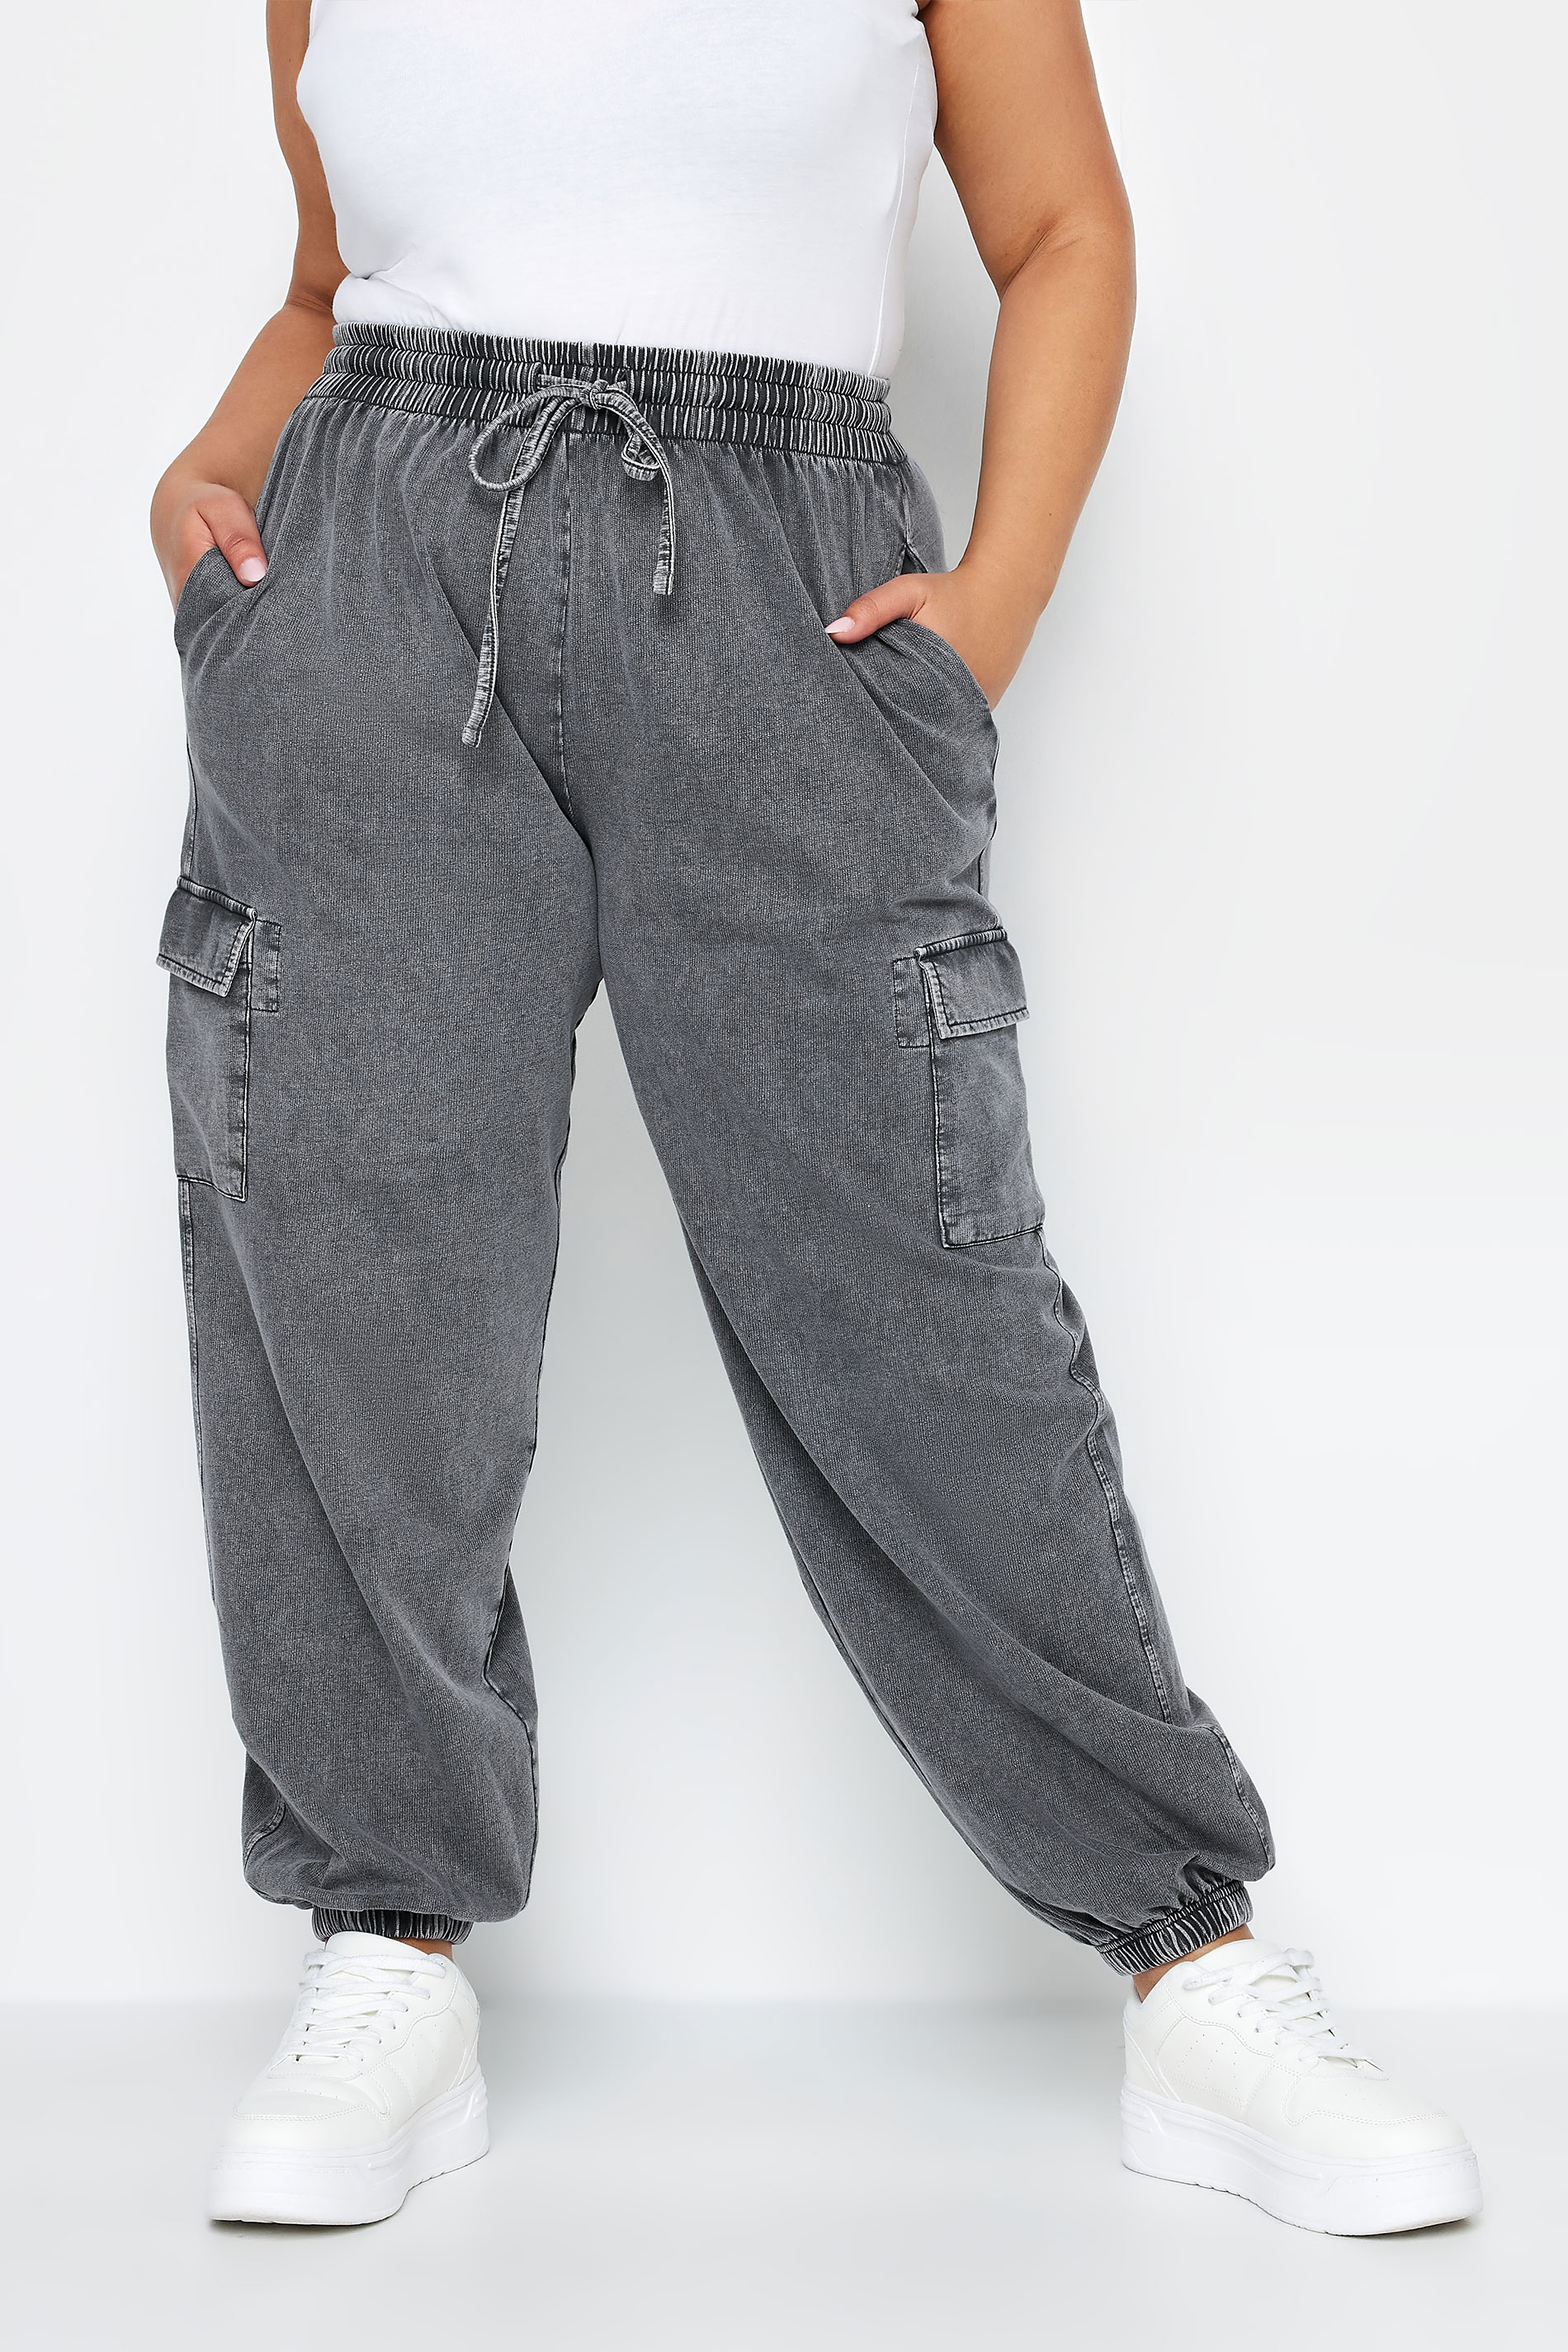 LIMITED COLLECTION Plus Size Grey Acid Wash Cuffed Cargo Joggers